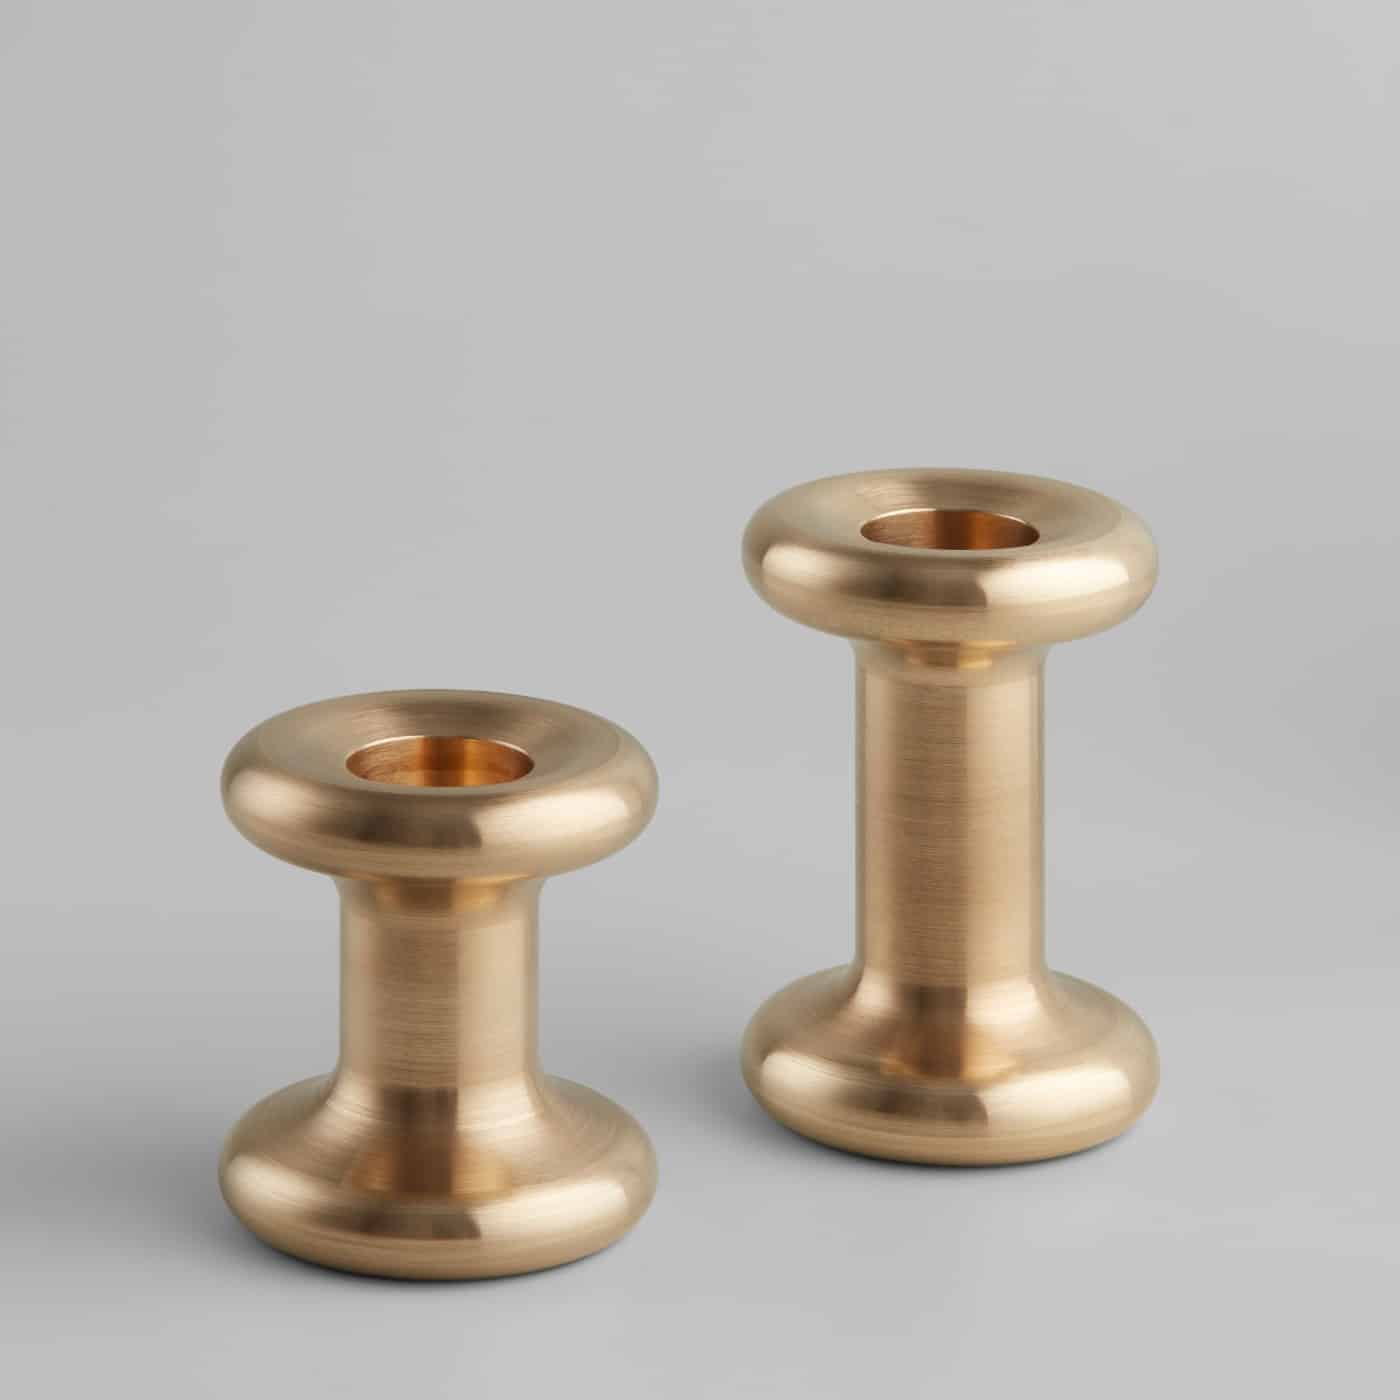 A pair of solid brass Lucie Candle Holders, without candles, on a plain background.